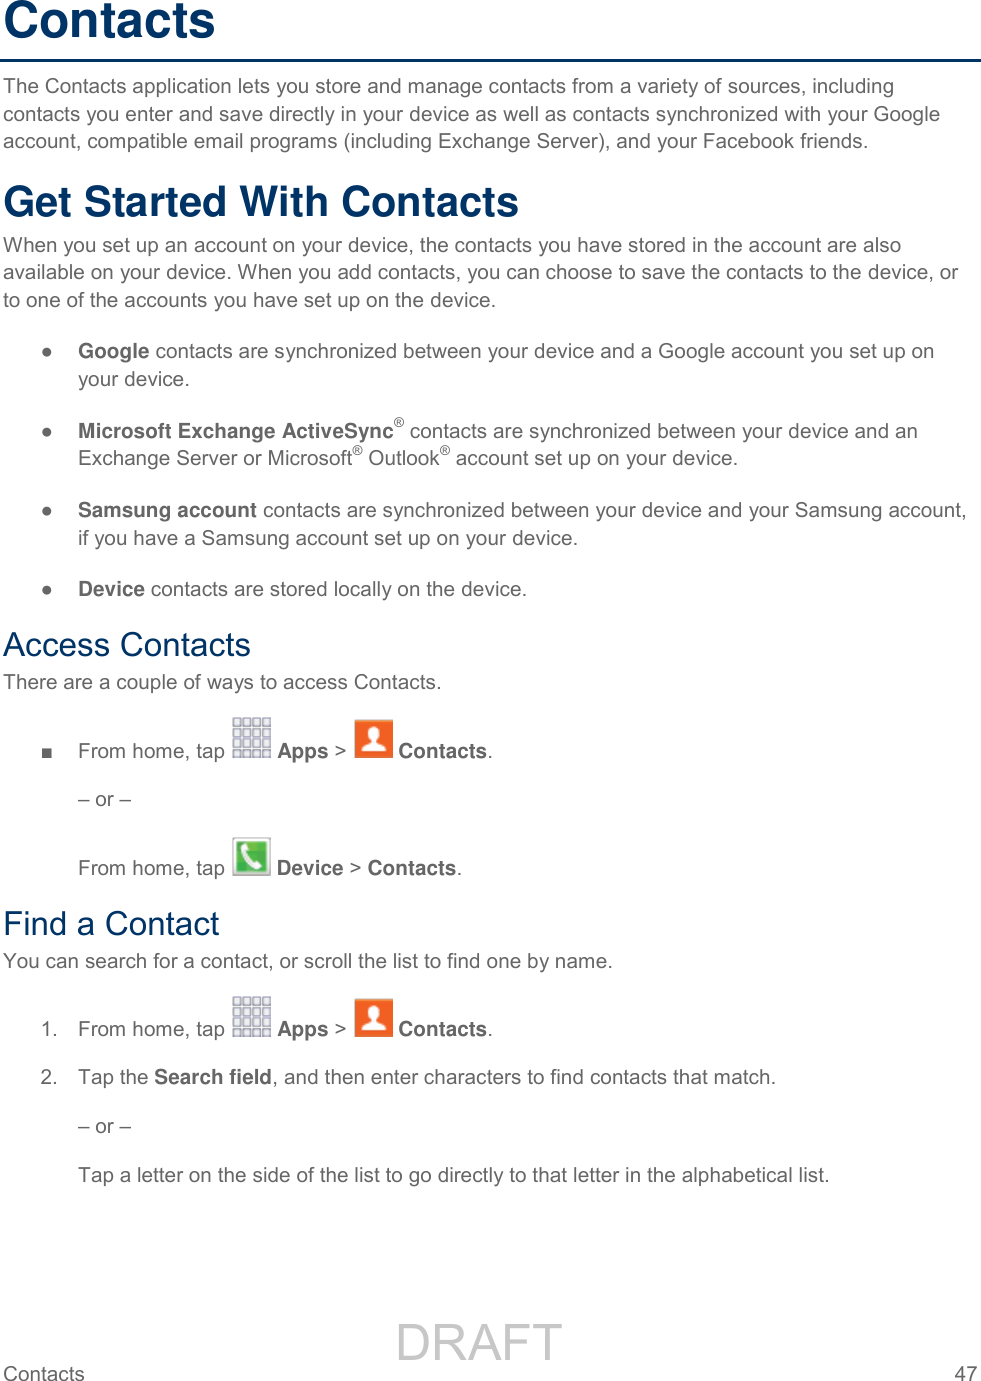                 DRAFT FOR INTERNAL USE ONLY Contacts  47   Contacts The Contacts application lets you store and manage contacts from a variety of sources, including contacts you enter and save directly in your device as well as contacts synchronized with your Google account, compatible email programs (including Exchange Server), and your Facebook friends. Get Started With Contacts When you set up an account on your device, the contacts you have stored in the account are also available on your device. When you add contacts, you can choose to save the contacts to the device, or to one of the accounts you have set up on the device. ● Google contacts are synchronized between your device and a Google account you set up on your device. ● Microsoft Exchange ActiveSync® contacts are synchronized between your device and an Exchange Server or Microsoft® Outlook® account set up on your device. ● Samsung account contacts are synchronized between your device and your Samsung account, if you have a Samsung account set up on your device. ● Device contacts are stored locally on the device. Access Contacts There are a couple of ways to access Contacts. ■  From home, tap   Apps &gt;   Contacts. – or – From home, tap   Device &gt; Contacts. Find a Contact You can search for a contact, or scroll the list to find one by name. 1.  From home, tap   Apps &gt;   Contacts. 2.  Tap the Search field, and then enter characters to find contacts that match. – or – Tap a letter on the side of the list to go directly to that letter in the alphabetical list. 